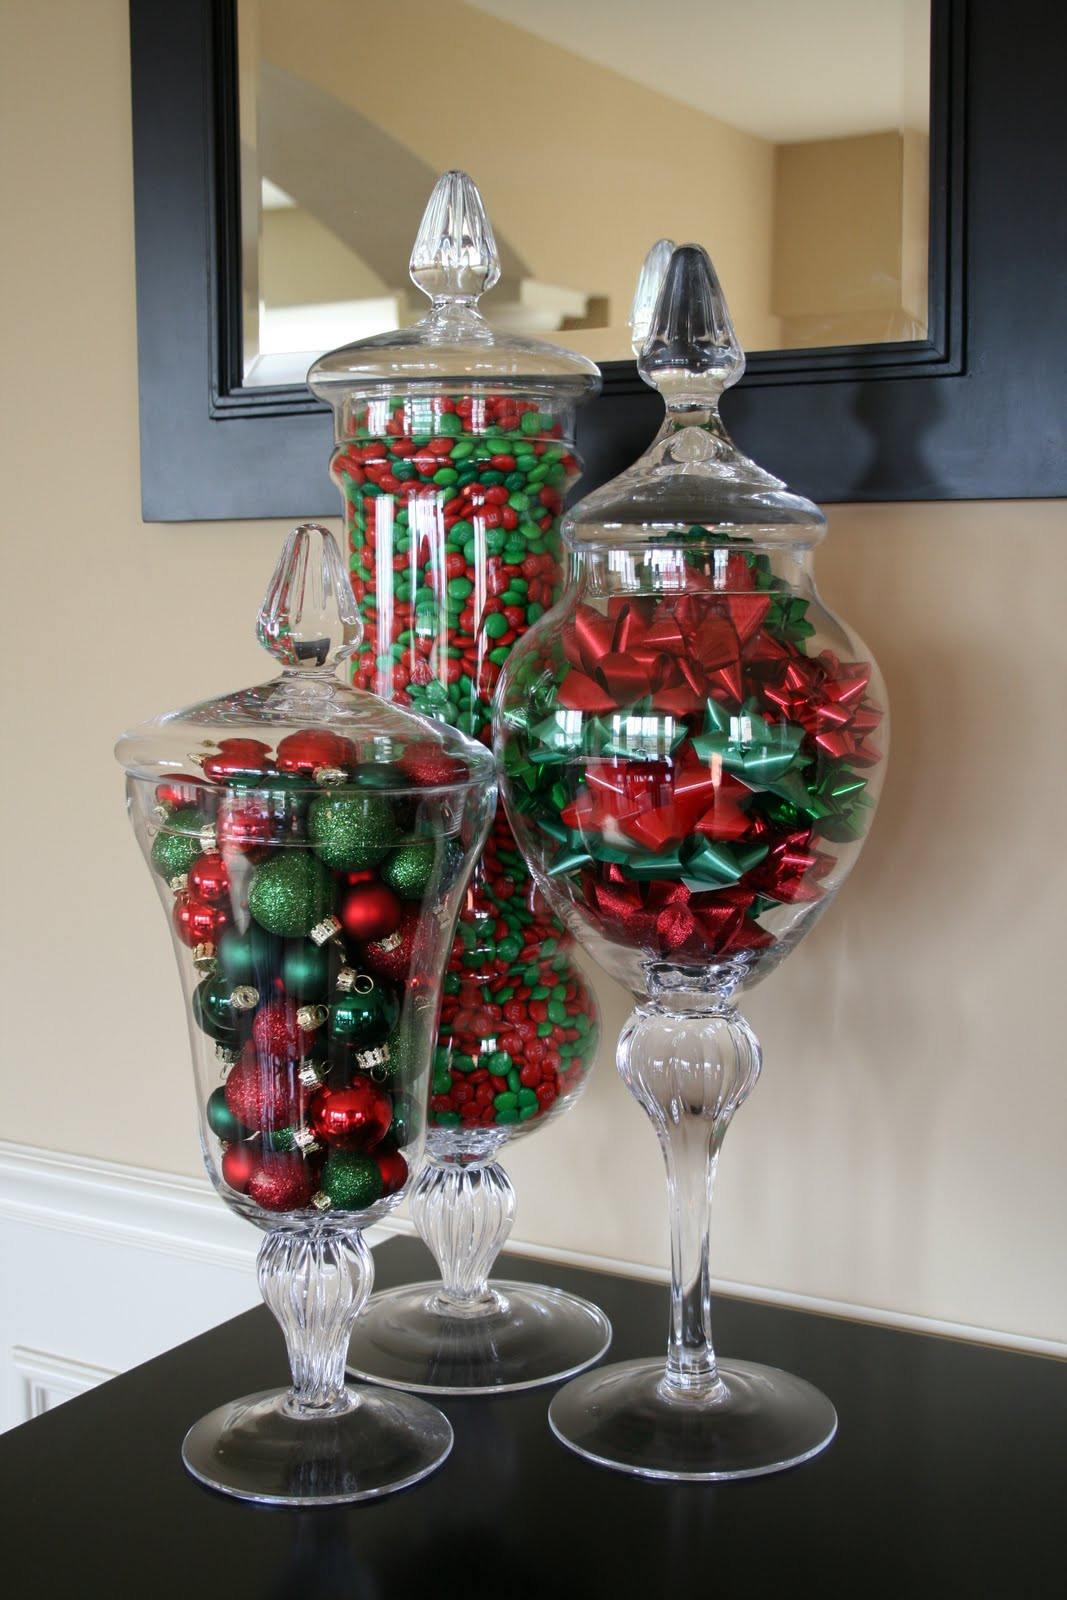 Christmas Candy Decorations
 30 Cute & Creative Christmas Decorating Ideas